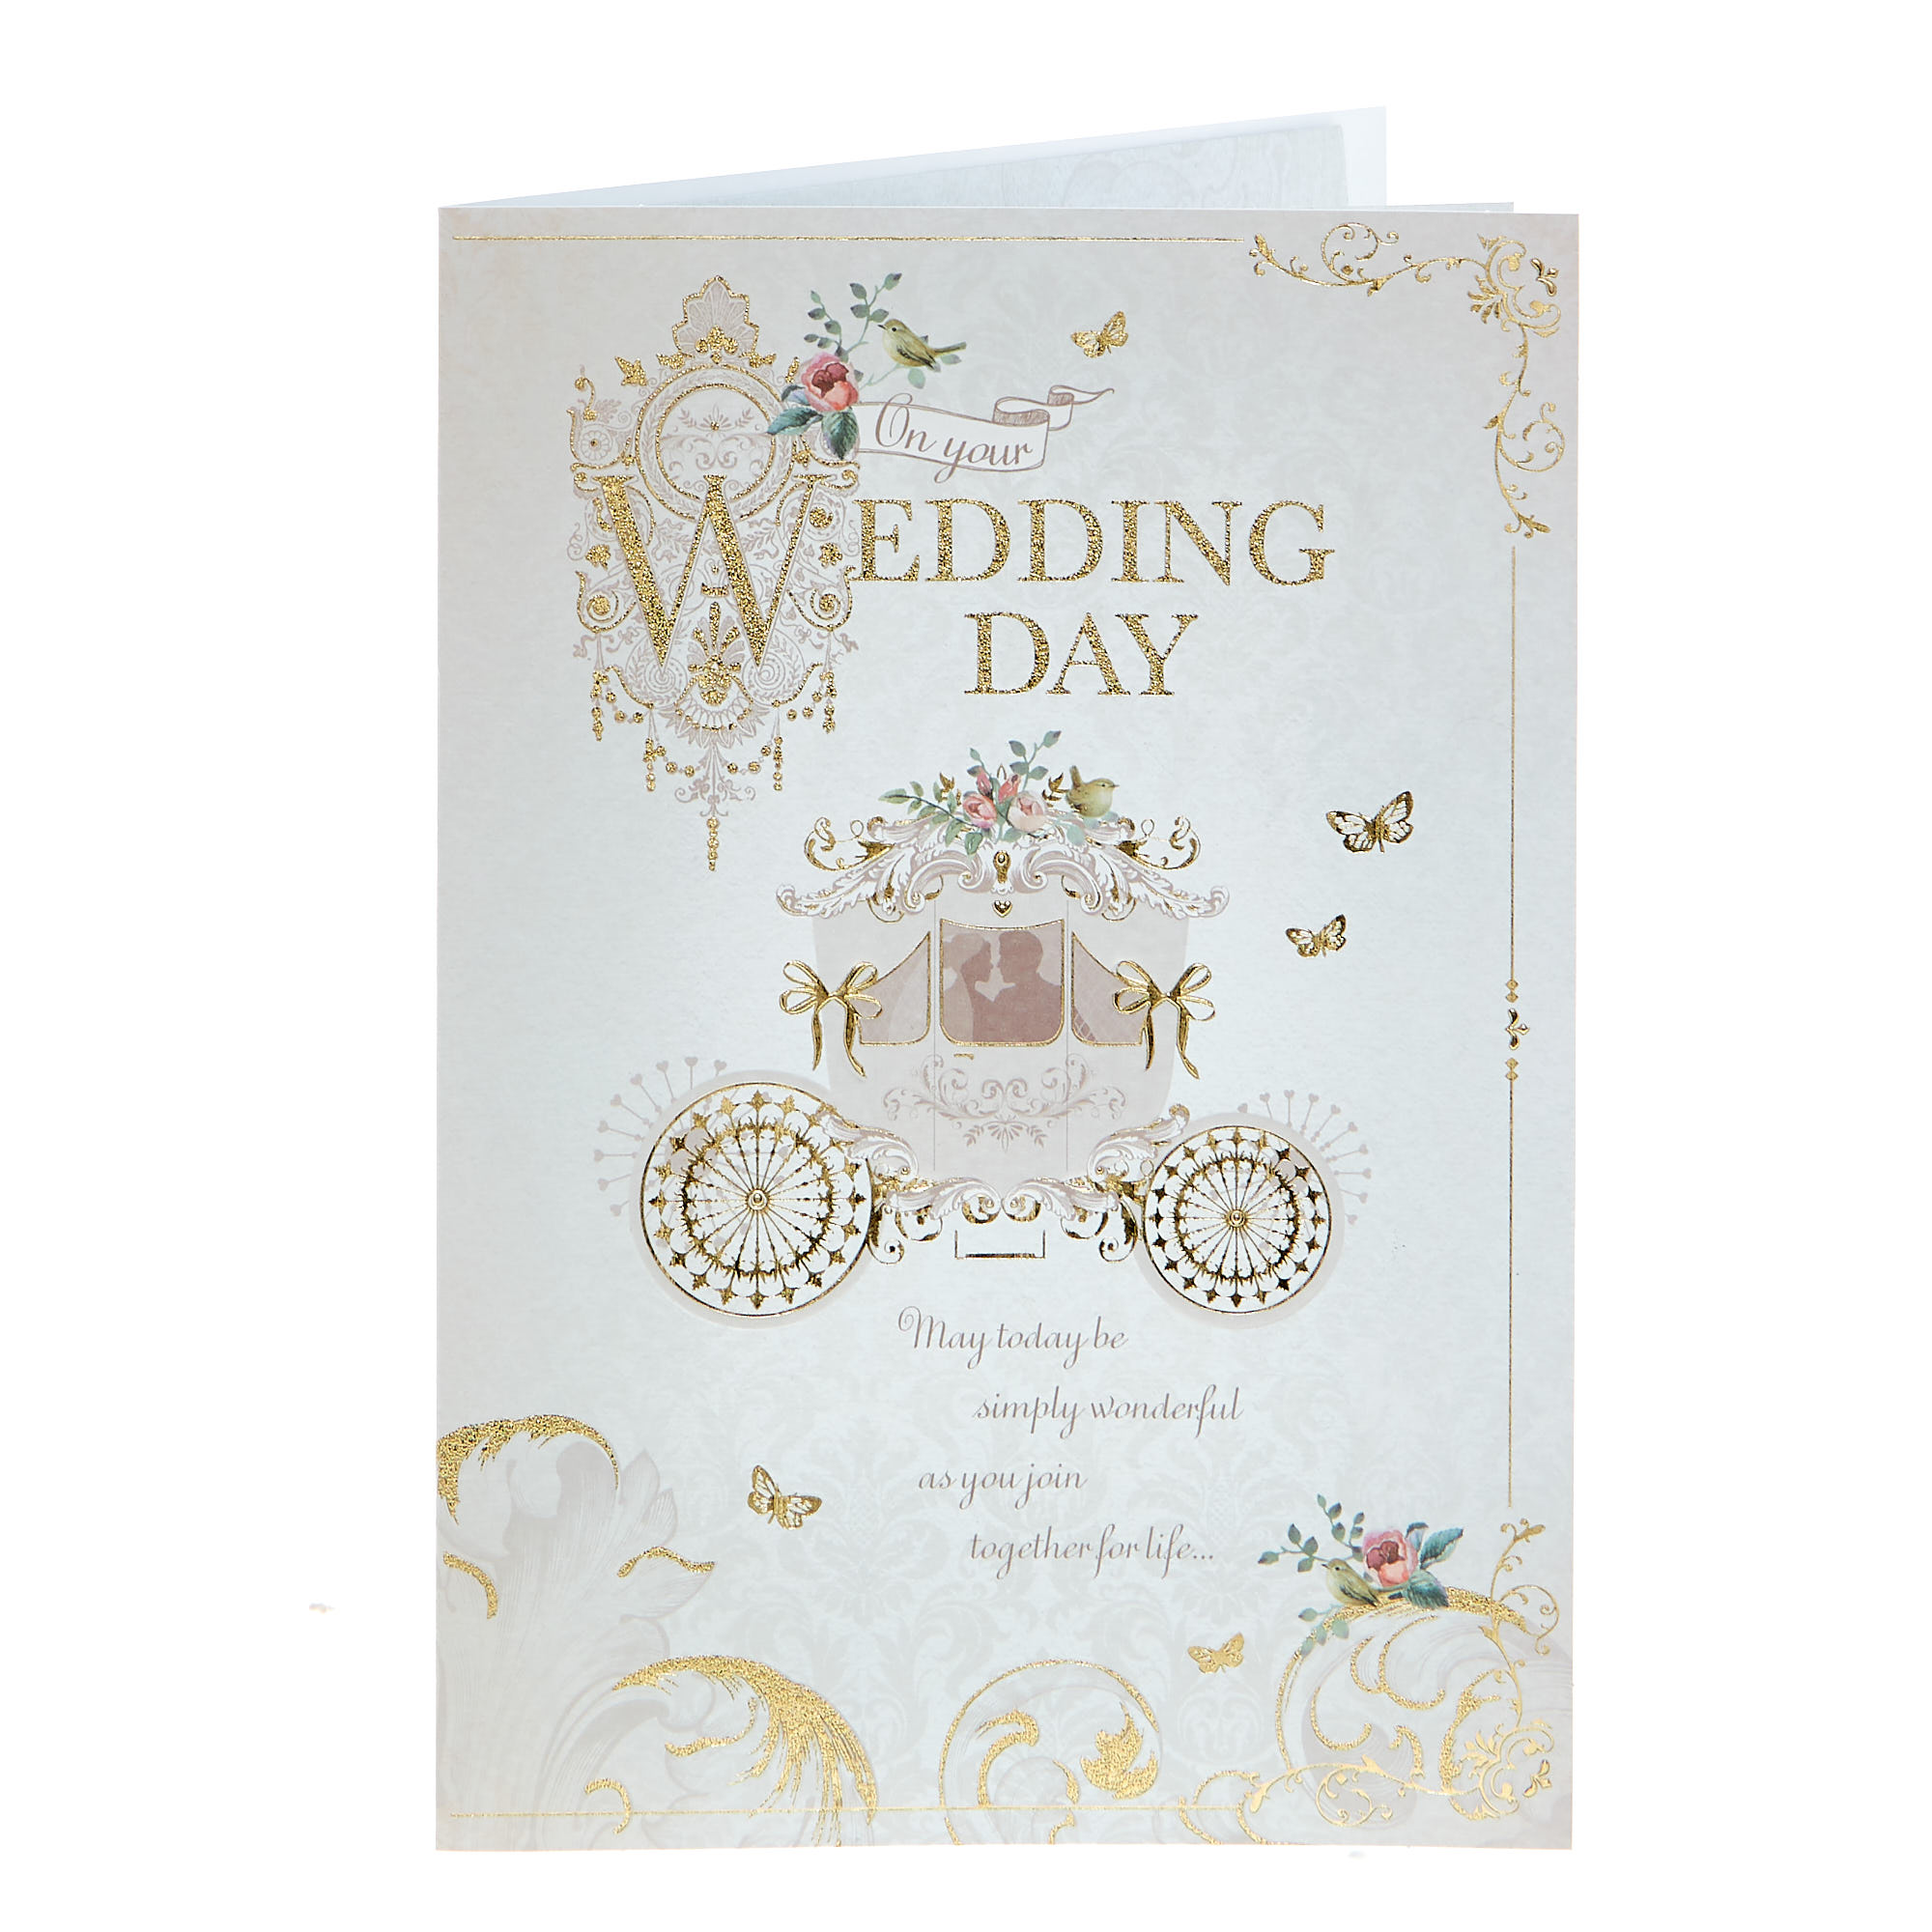 Wedding Card - As You Join Together For Life